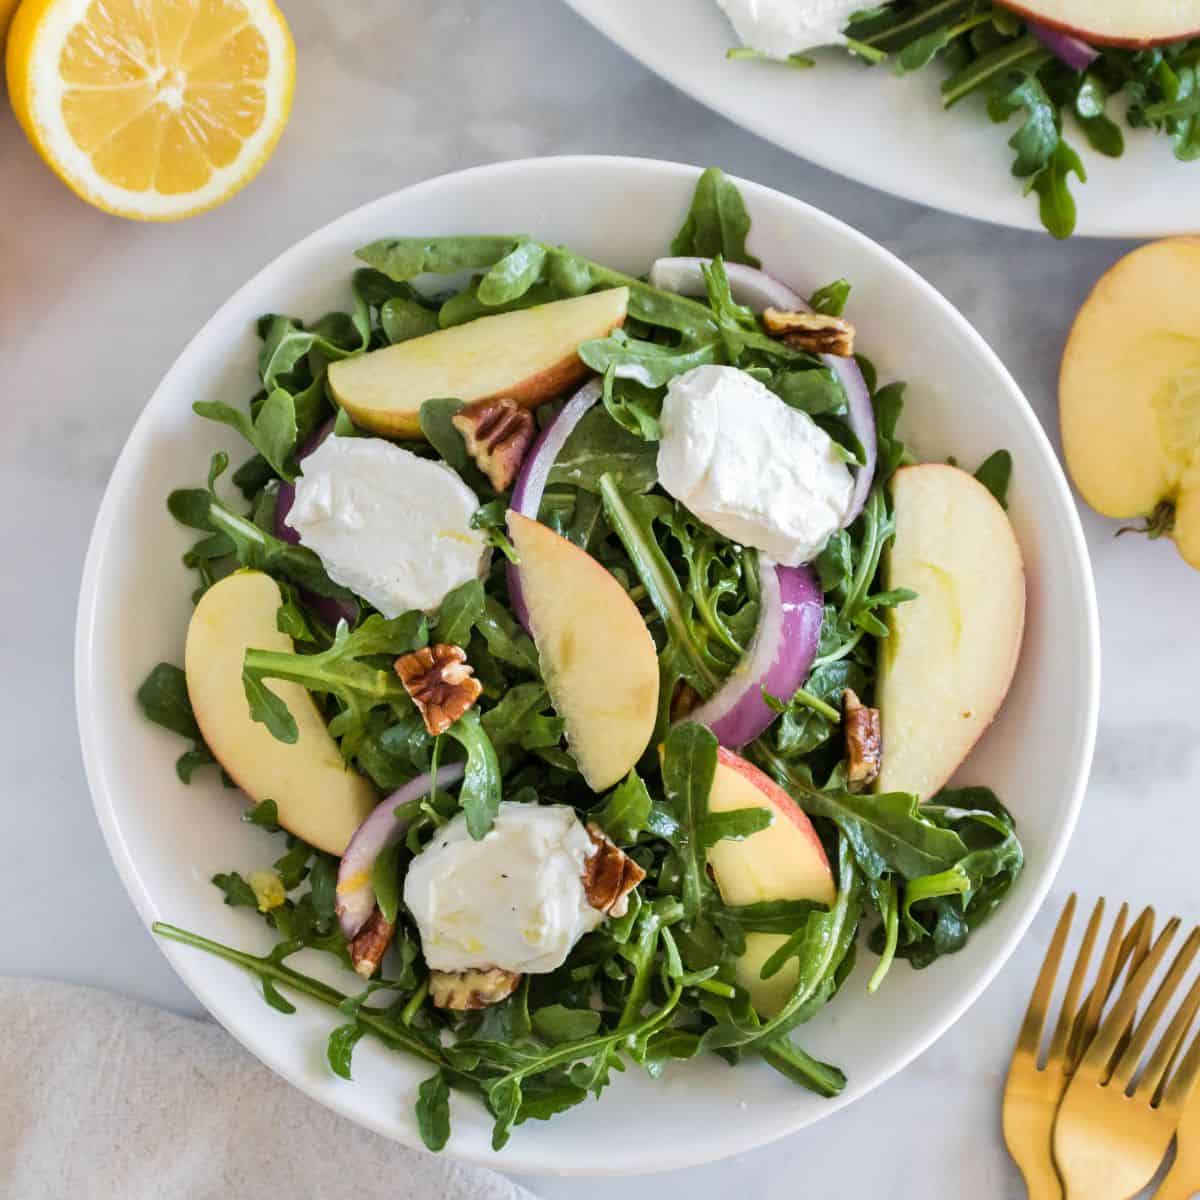 A bowl of arugula salad with apples and goat cheese.